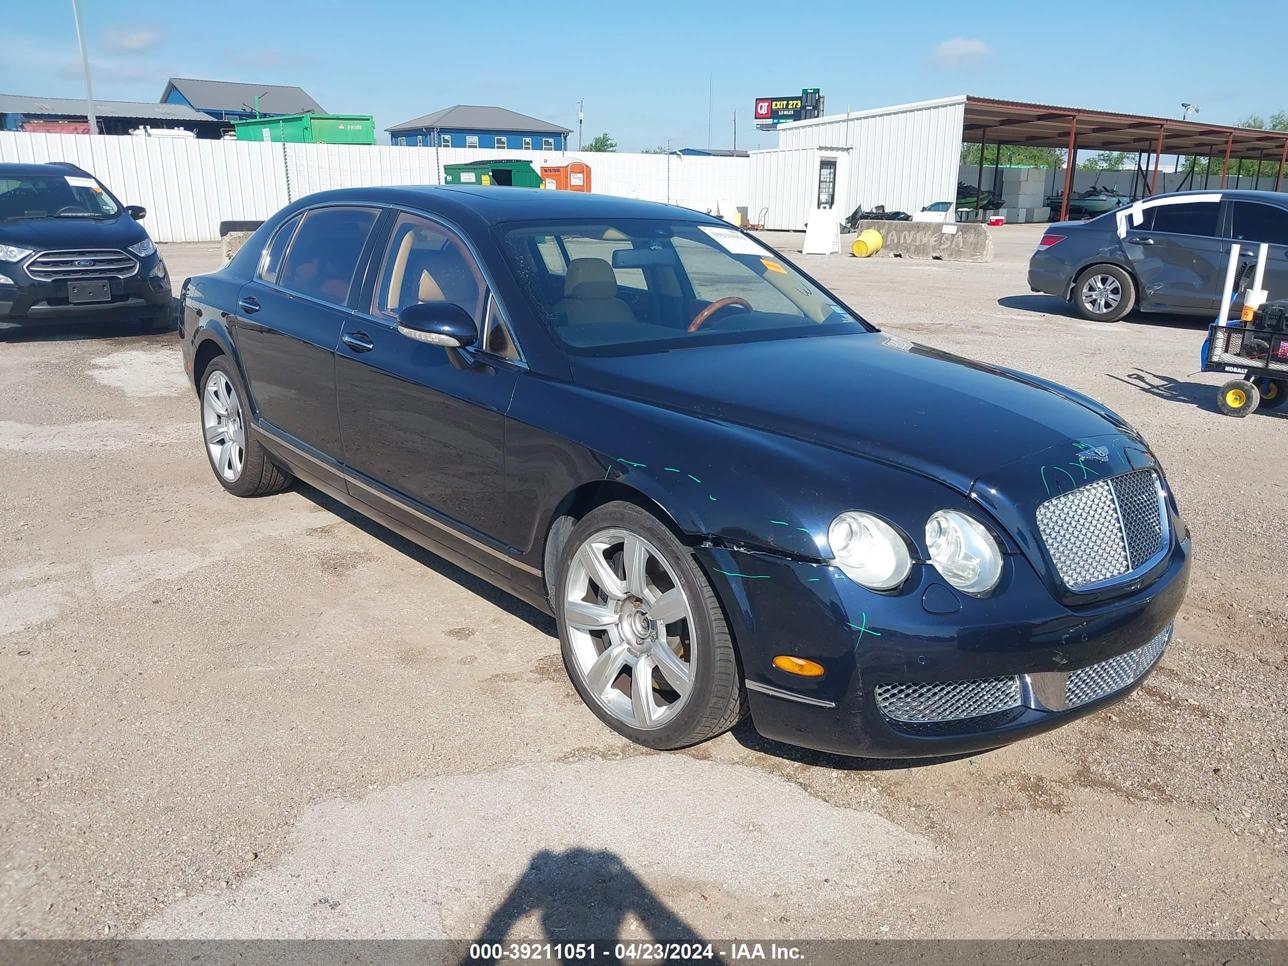 vin: SCBBR53W36C039591 SCBBR53W36C039591 2006 bentley continental flying spur 6000 for Sale in 75172, 204 Mars Rd, Wilmer, Texas, USA